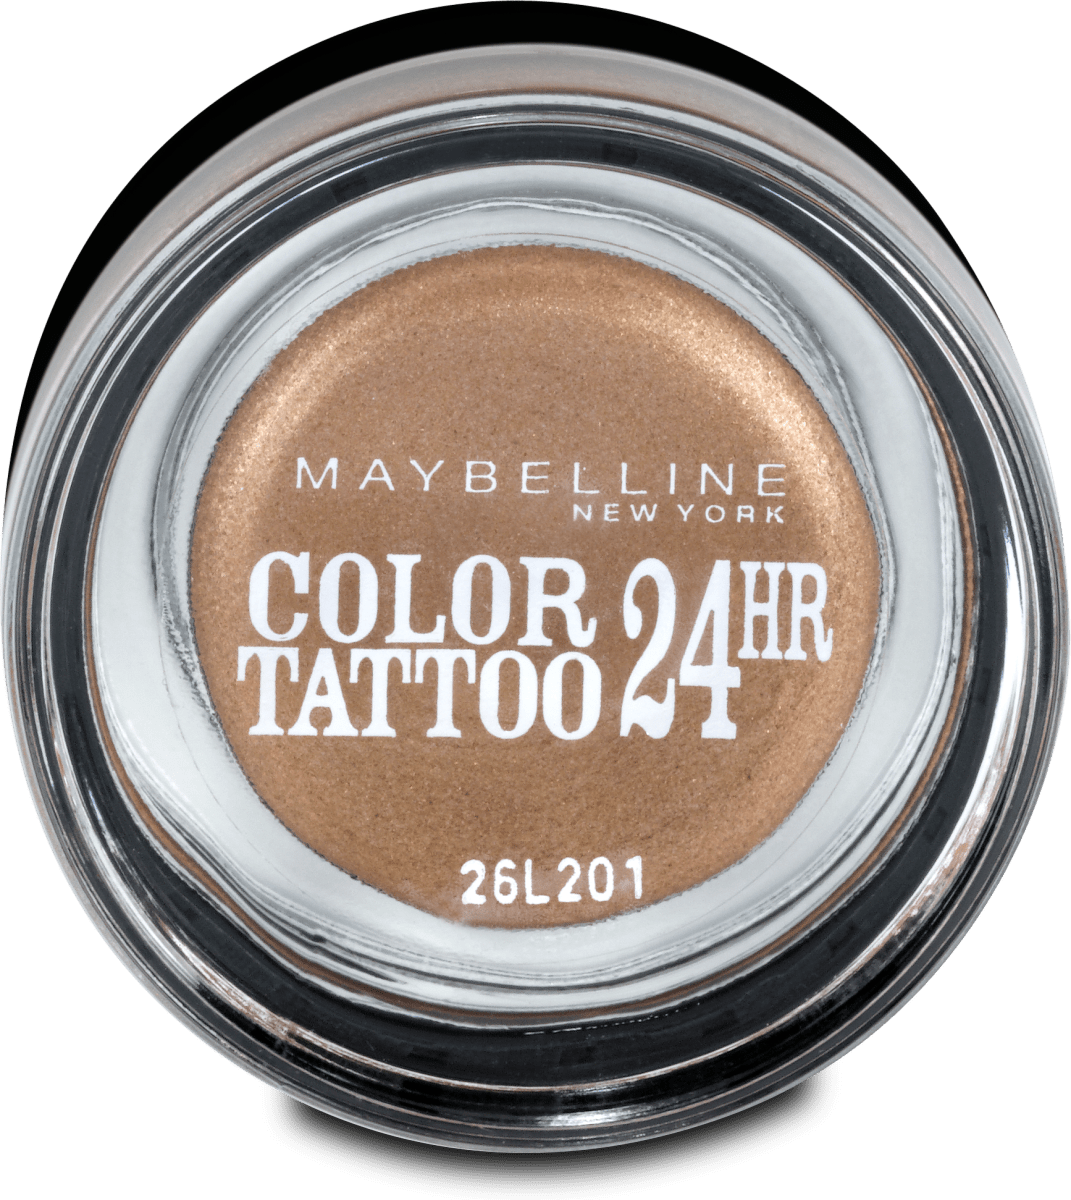 Maybelline New York Lidschatten Tattoo And On Color 35 24hr ml Bronze, On 3,5